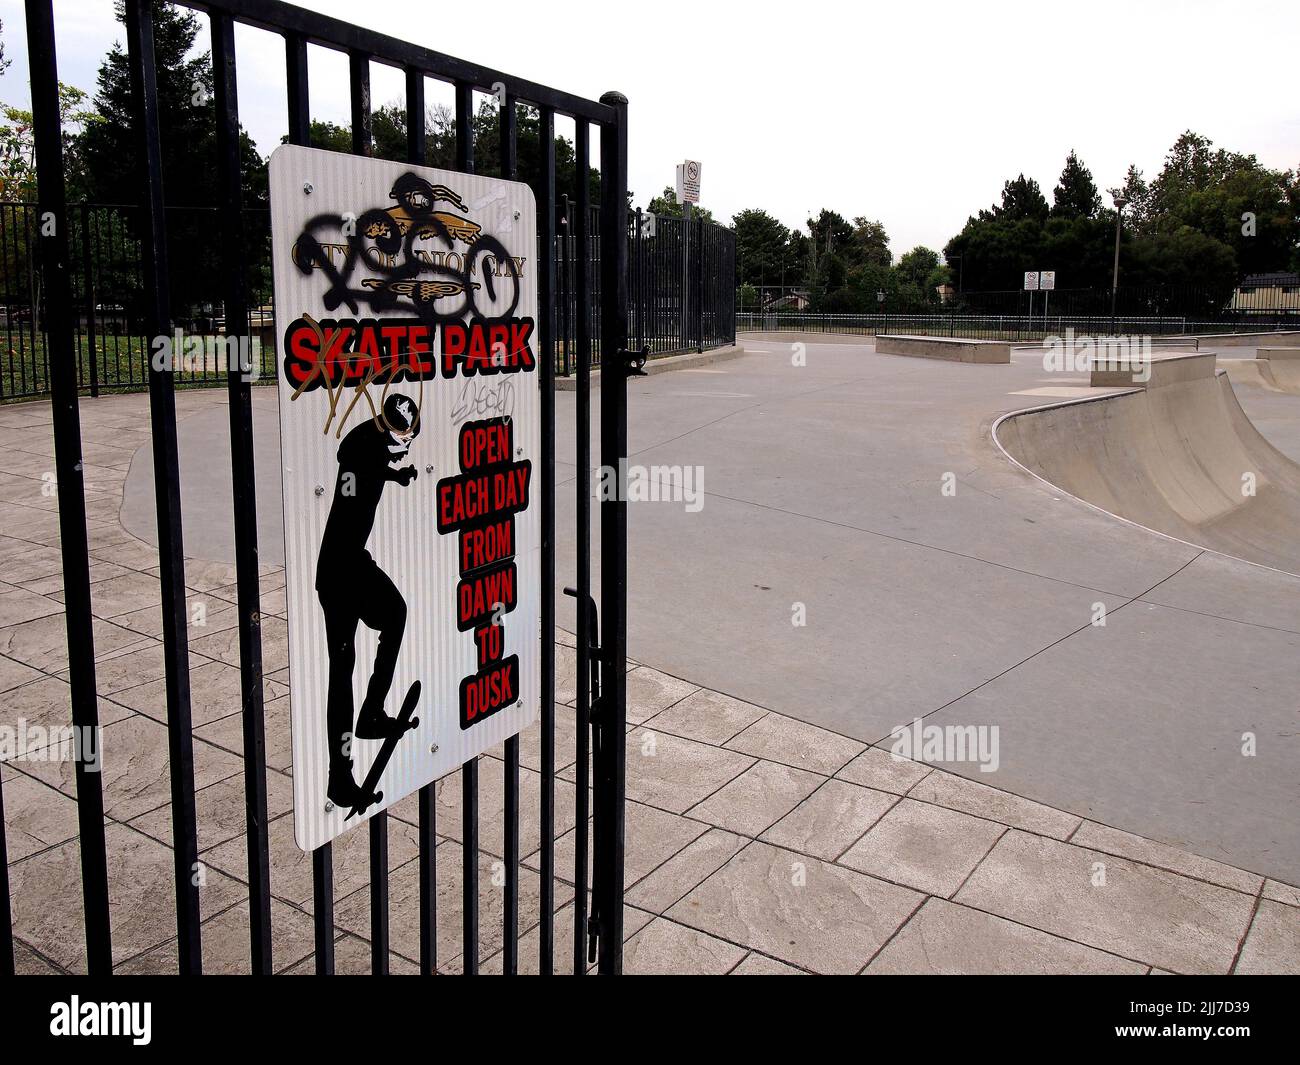 skate park entrance rules sign in William Cann Civic Center in Union City, California Stock Photo